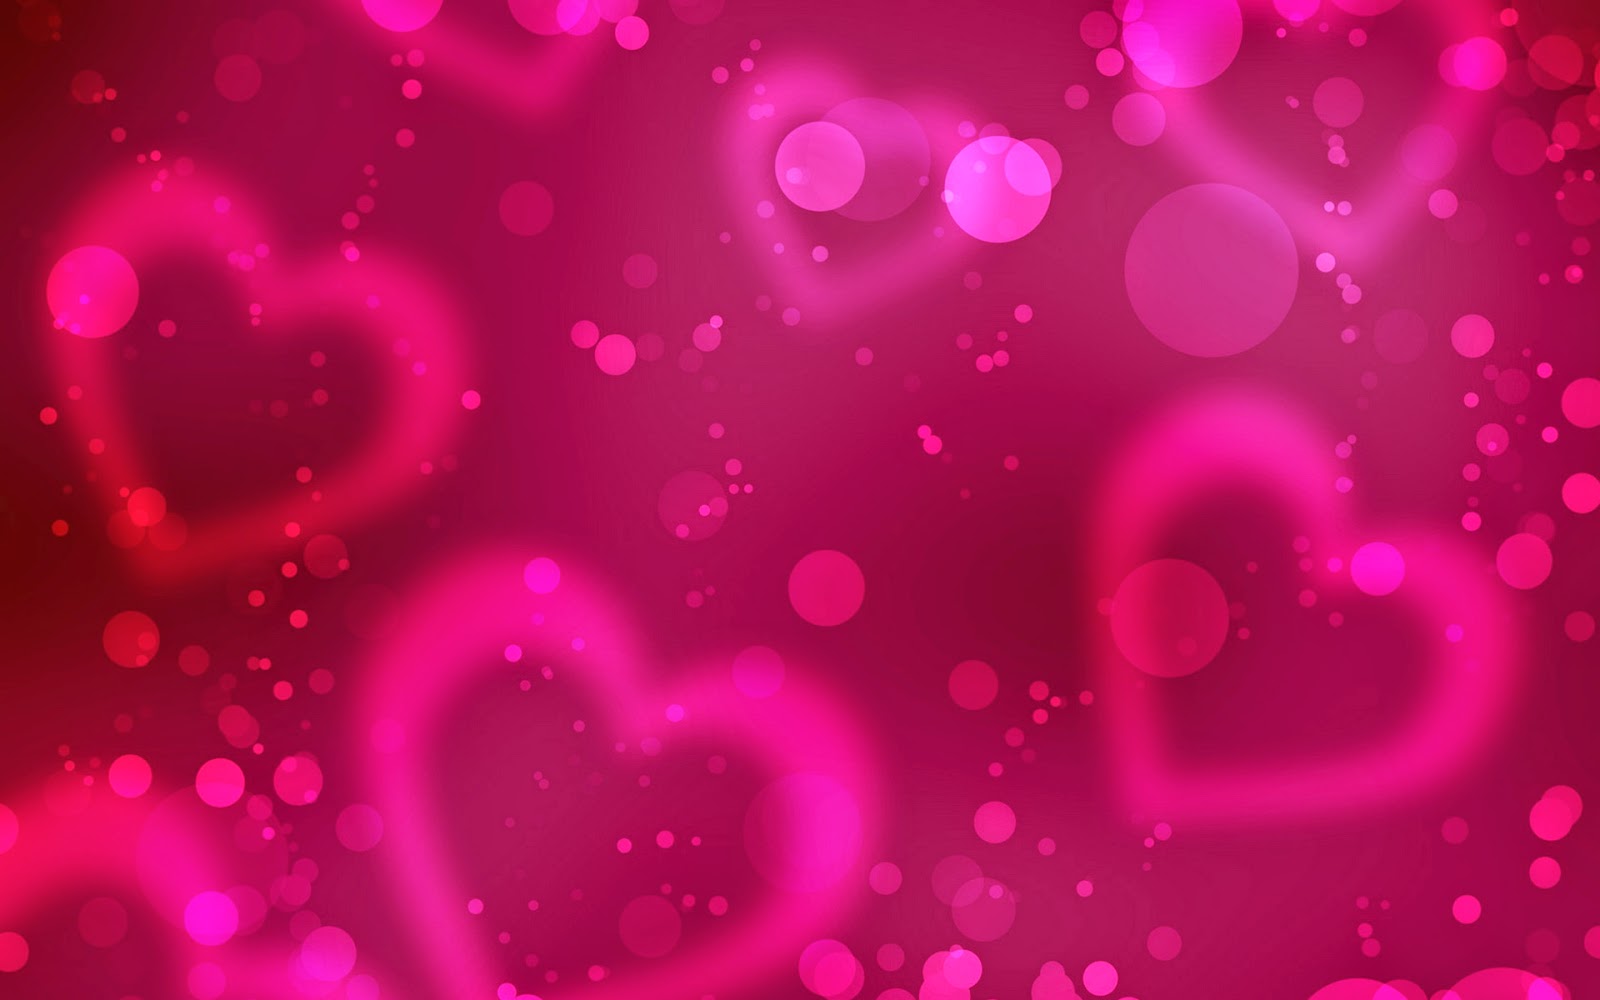 Gallery For Gt Pink And Purple Background Designs